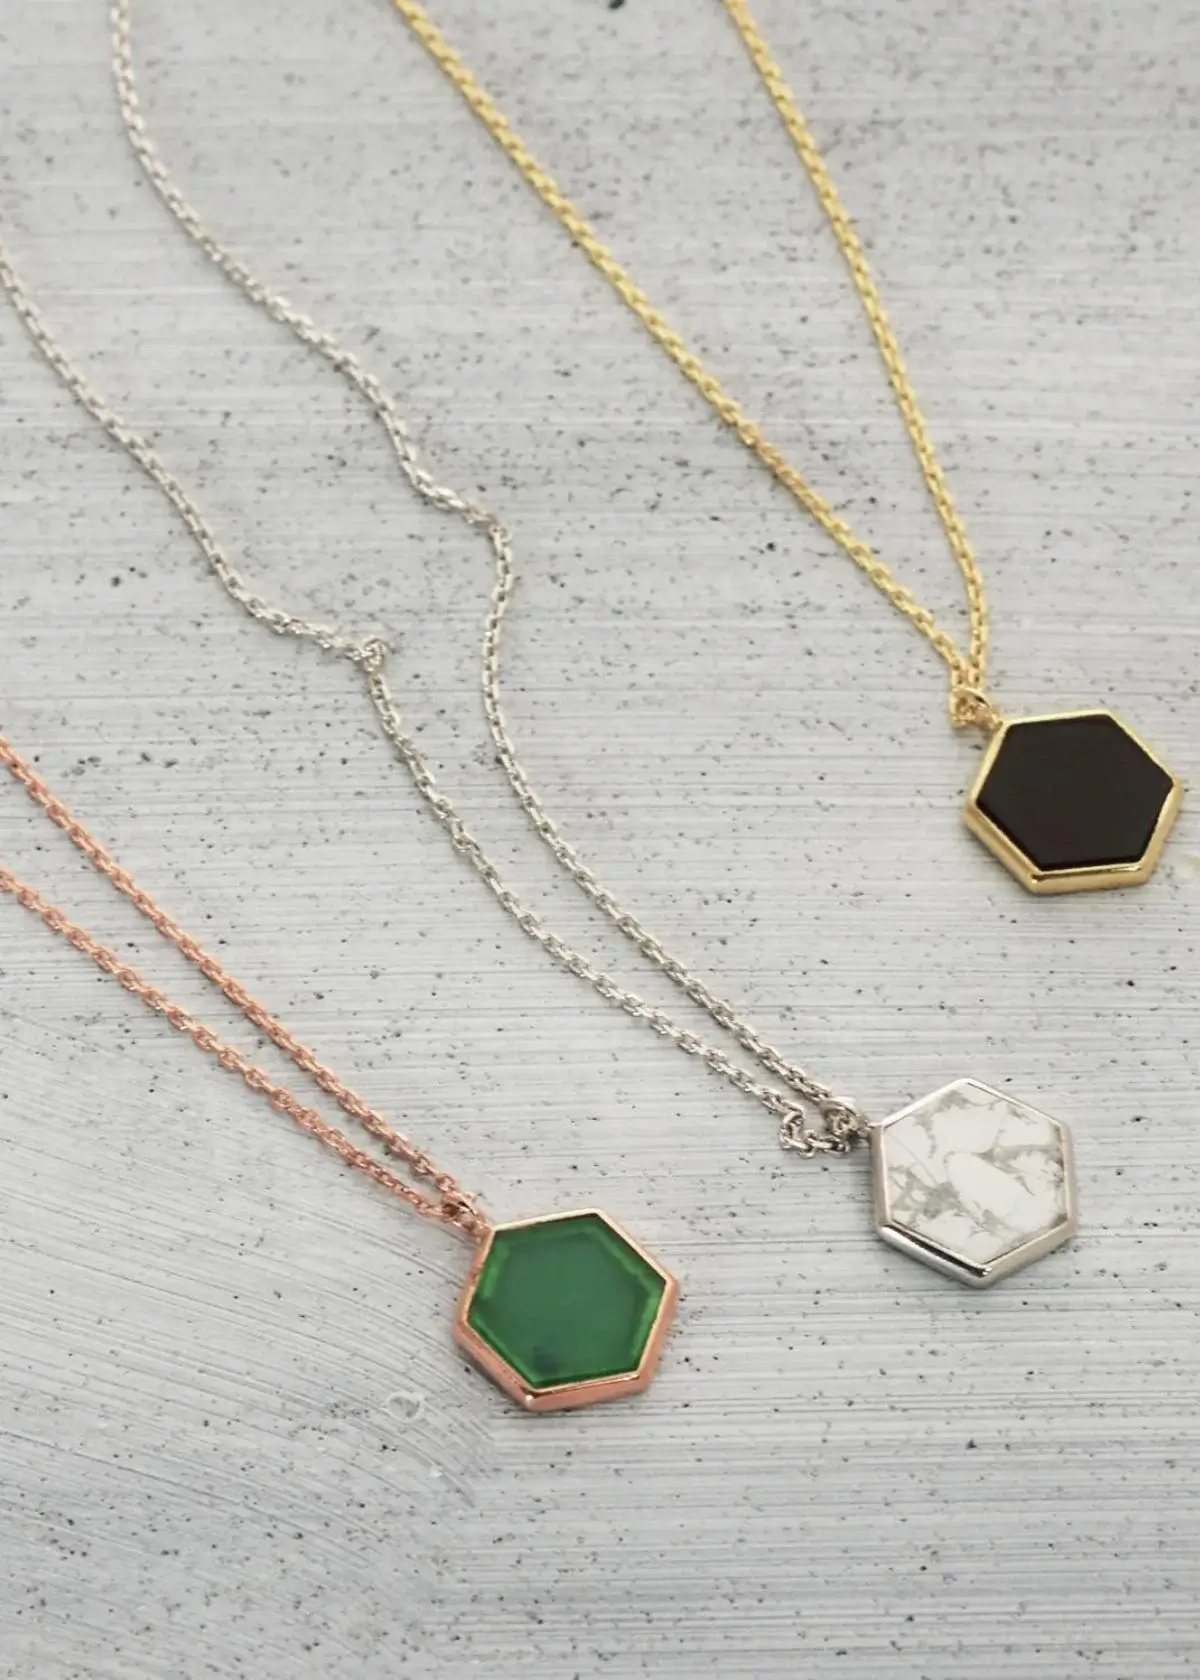 How to Choose the Right Hexagon Necklace?